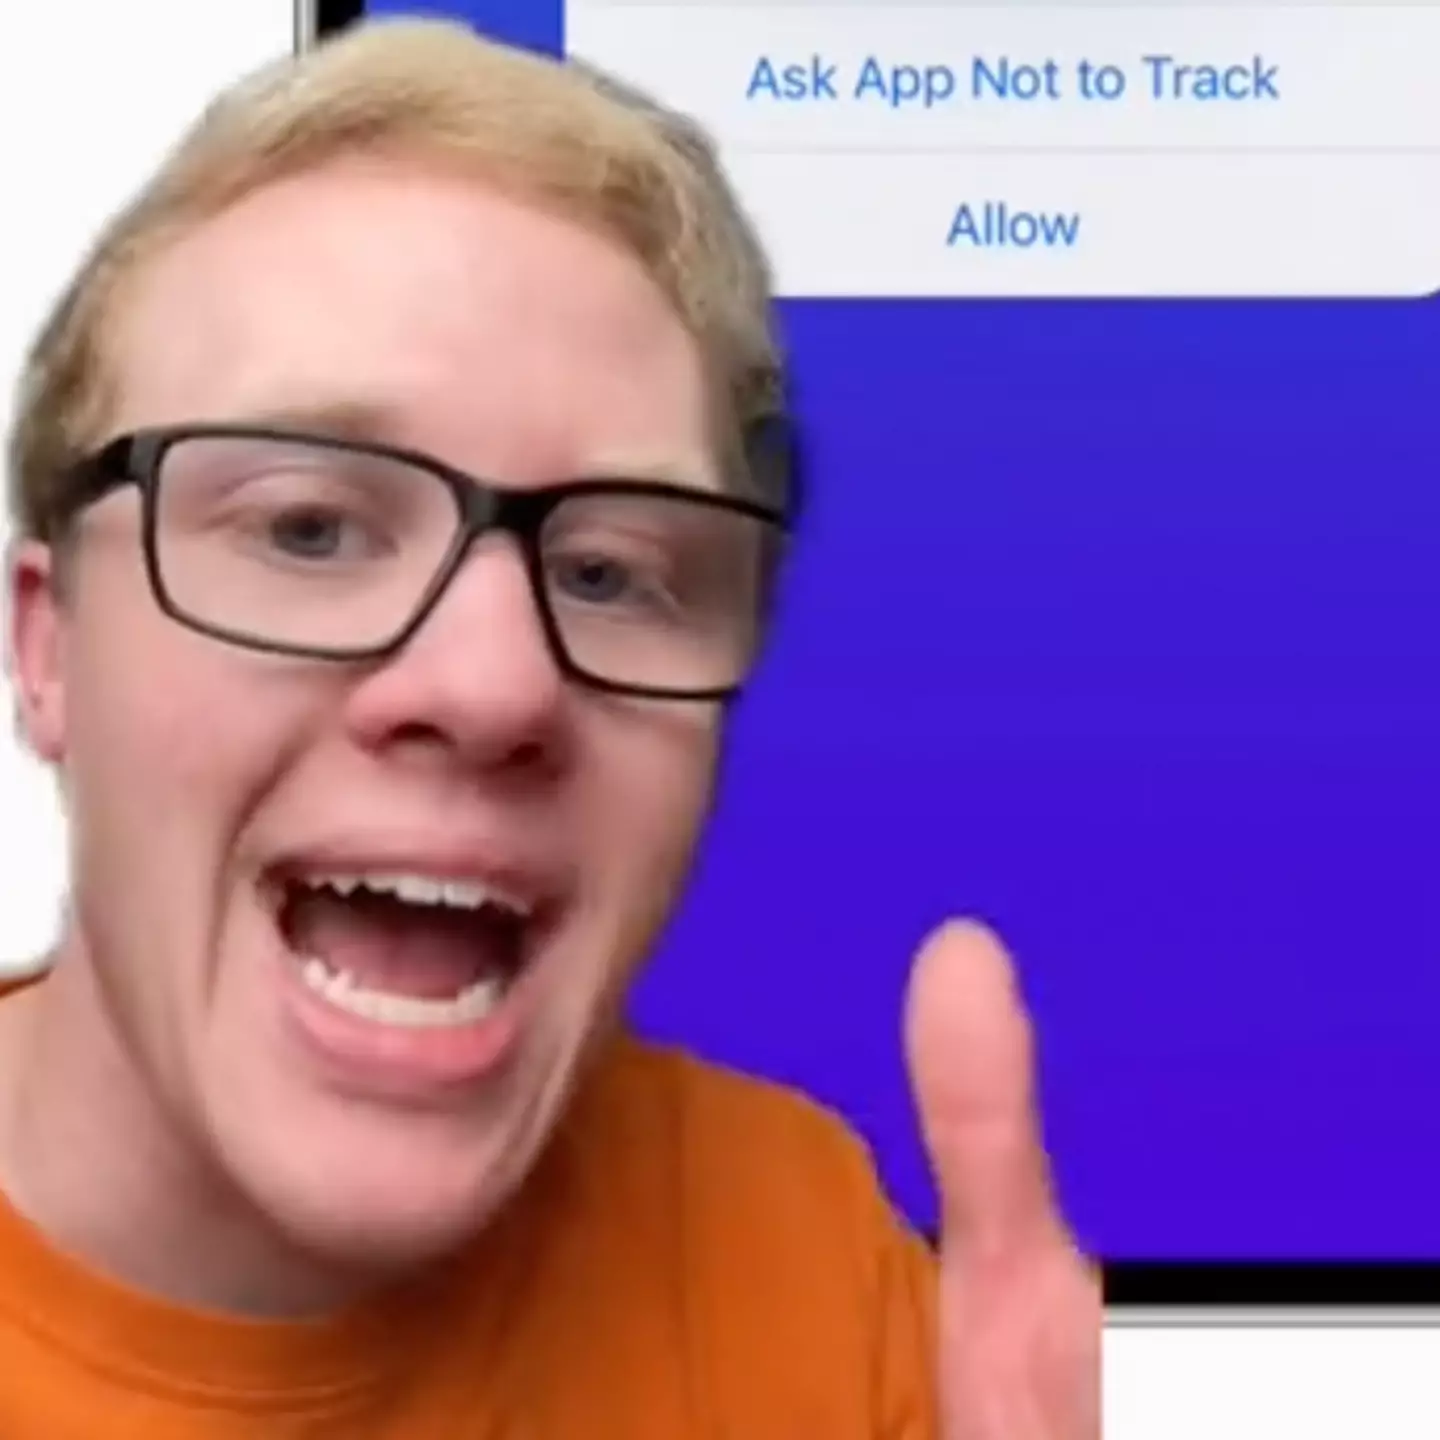 Man gives his top 5 reasons why iPhone is better than Android